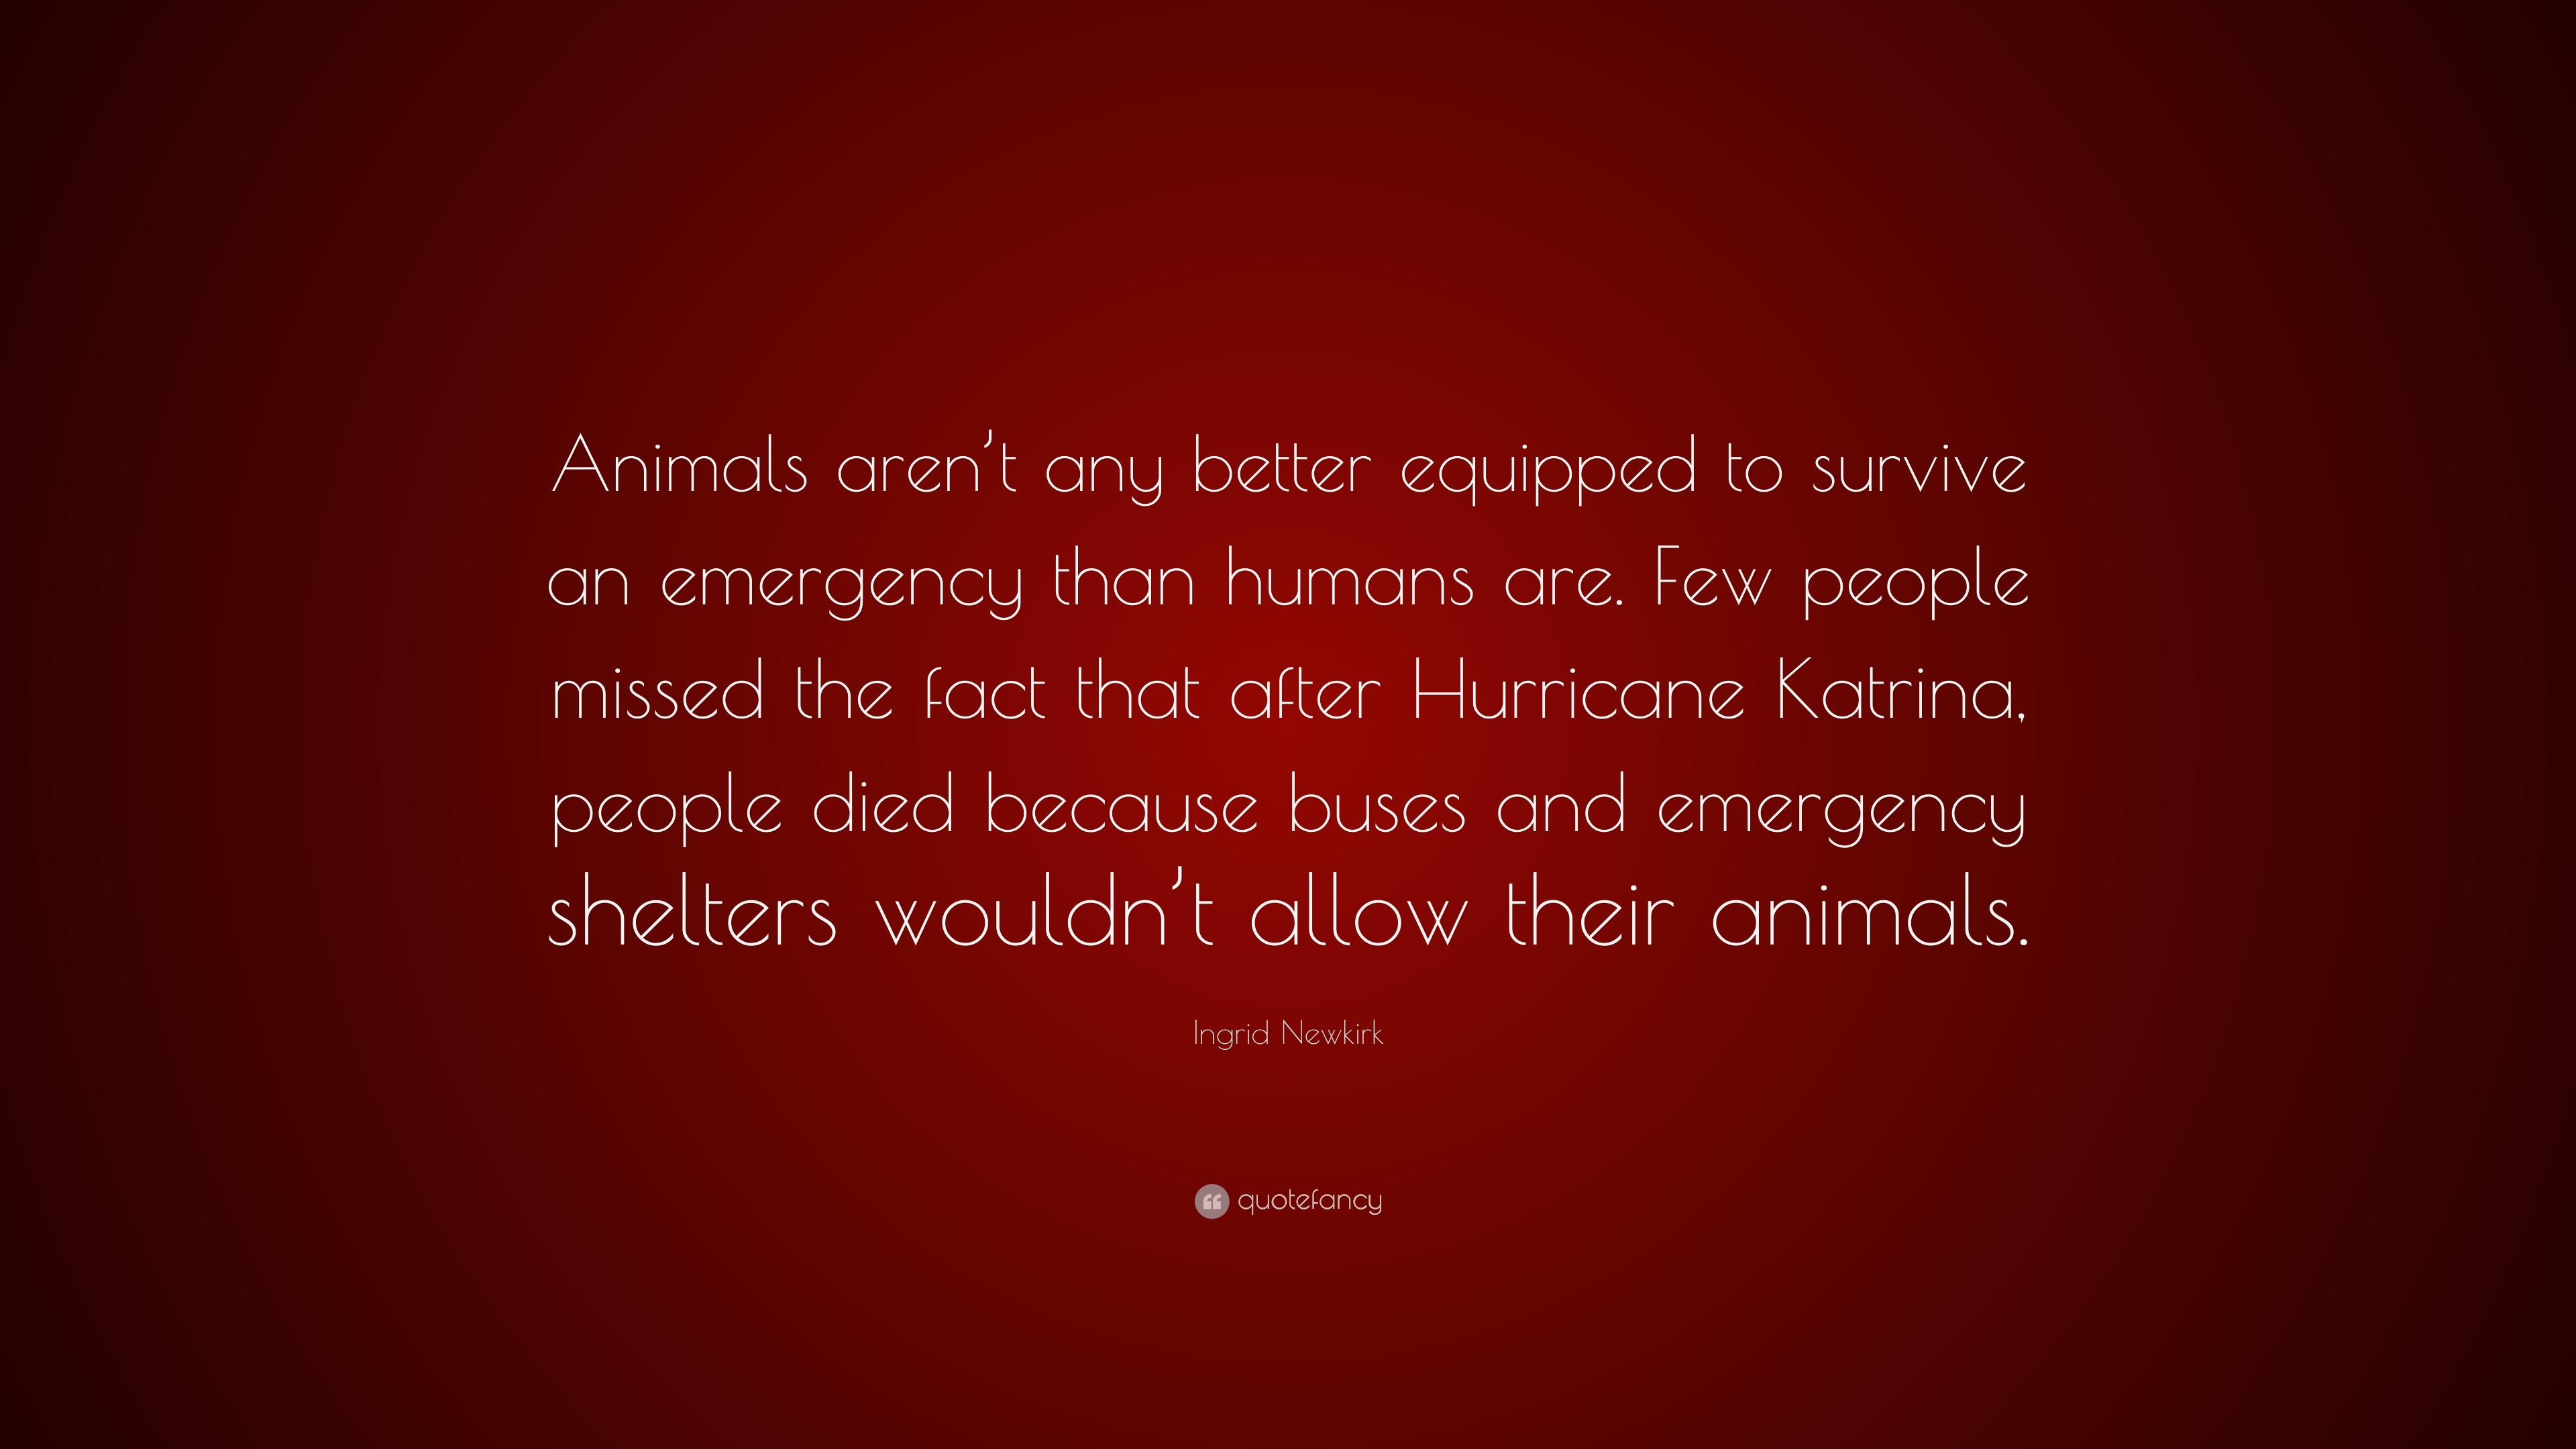 Ingrid Newkirk Quote: “Animals aren't any better equipped to survive